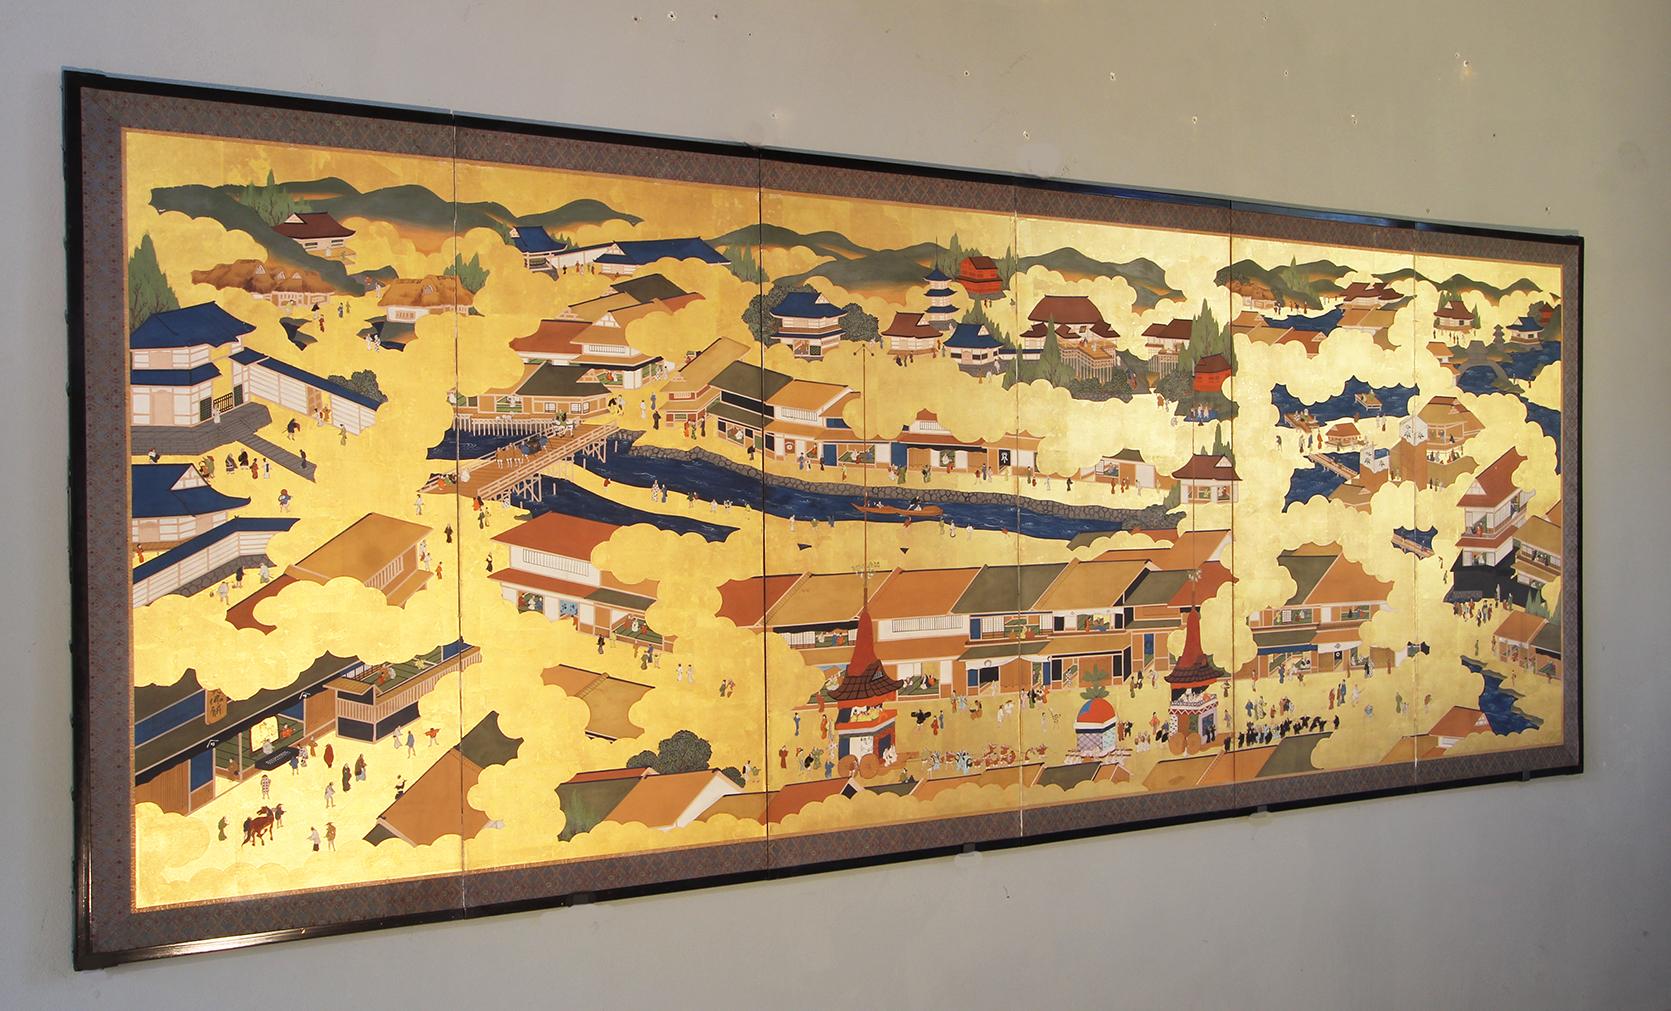 Kyoto Landscape, Japanese Screen Painted on Gold Leaf 1